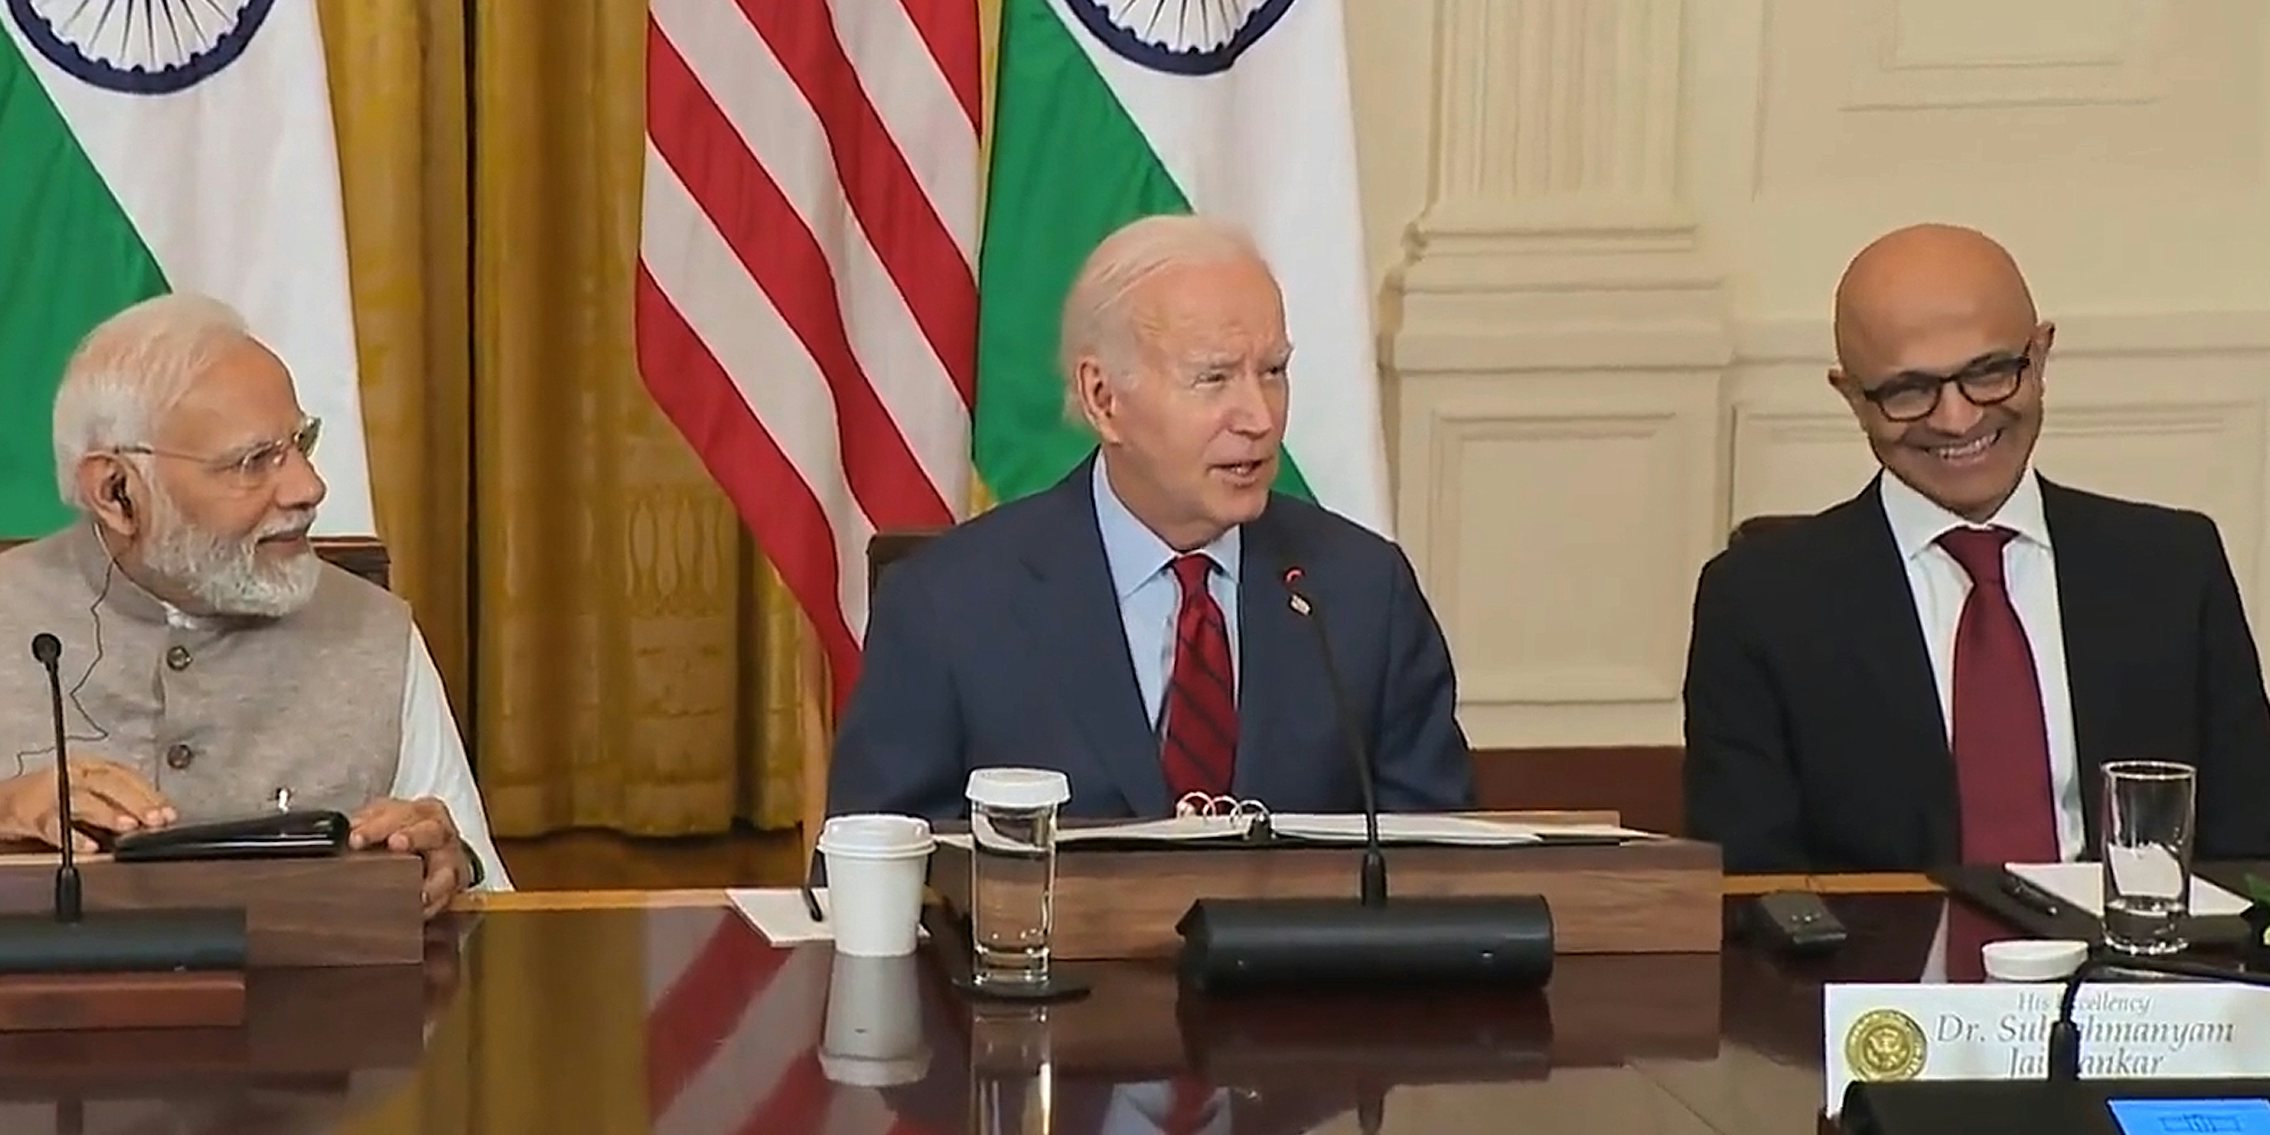 Joe Biden speaking into microphone at the White House